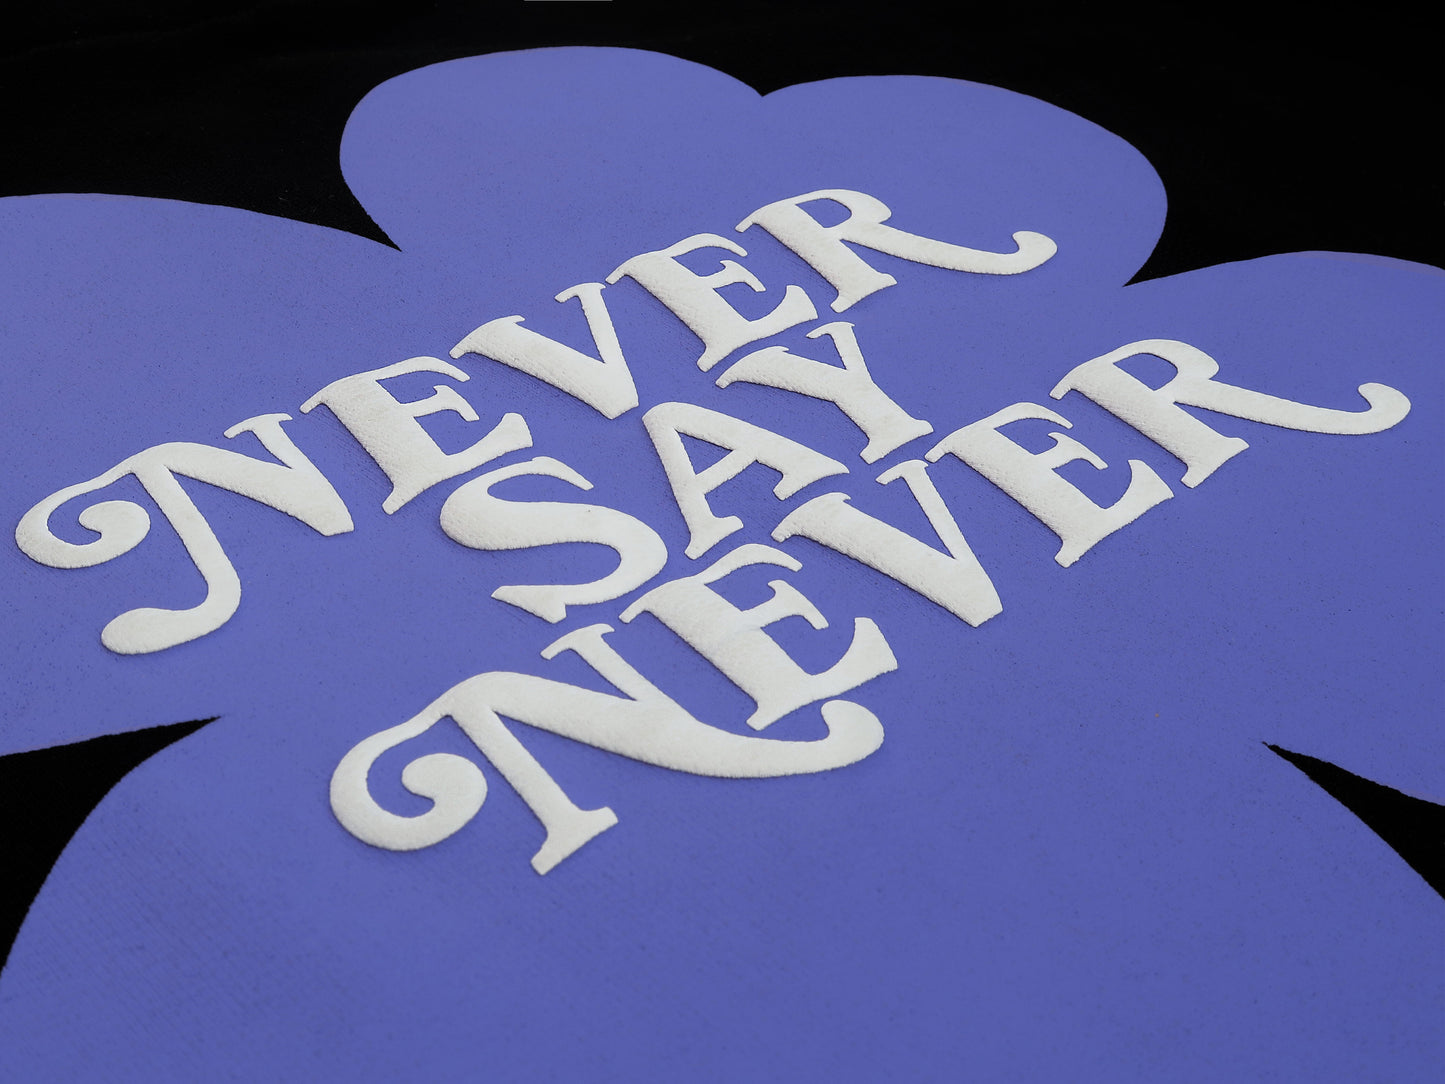 NEVER SAY NEVER HOODIE